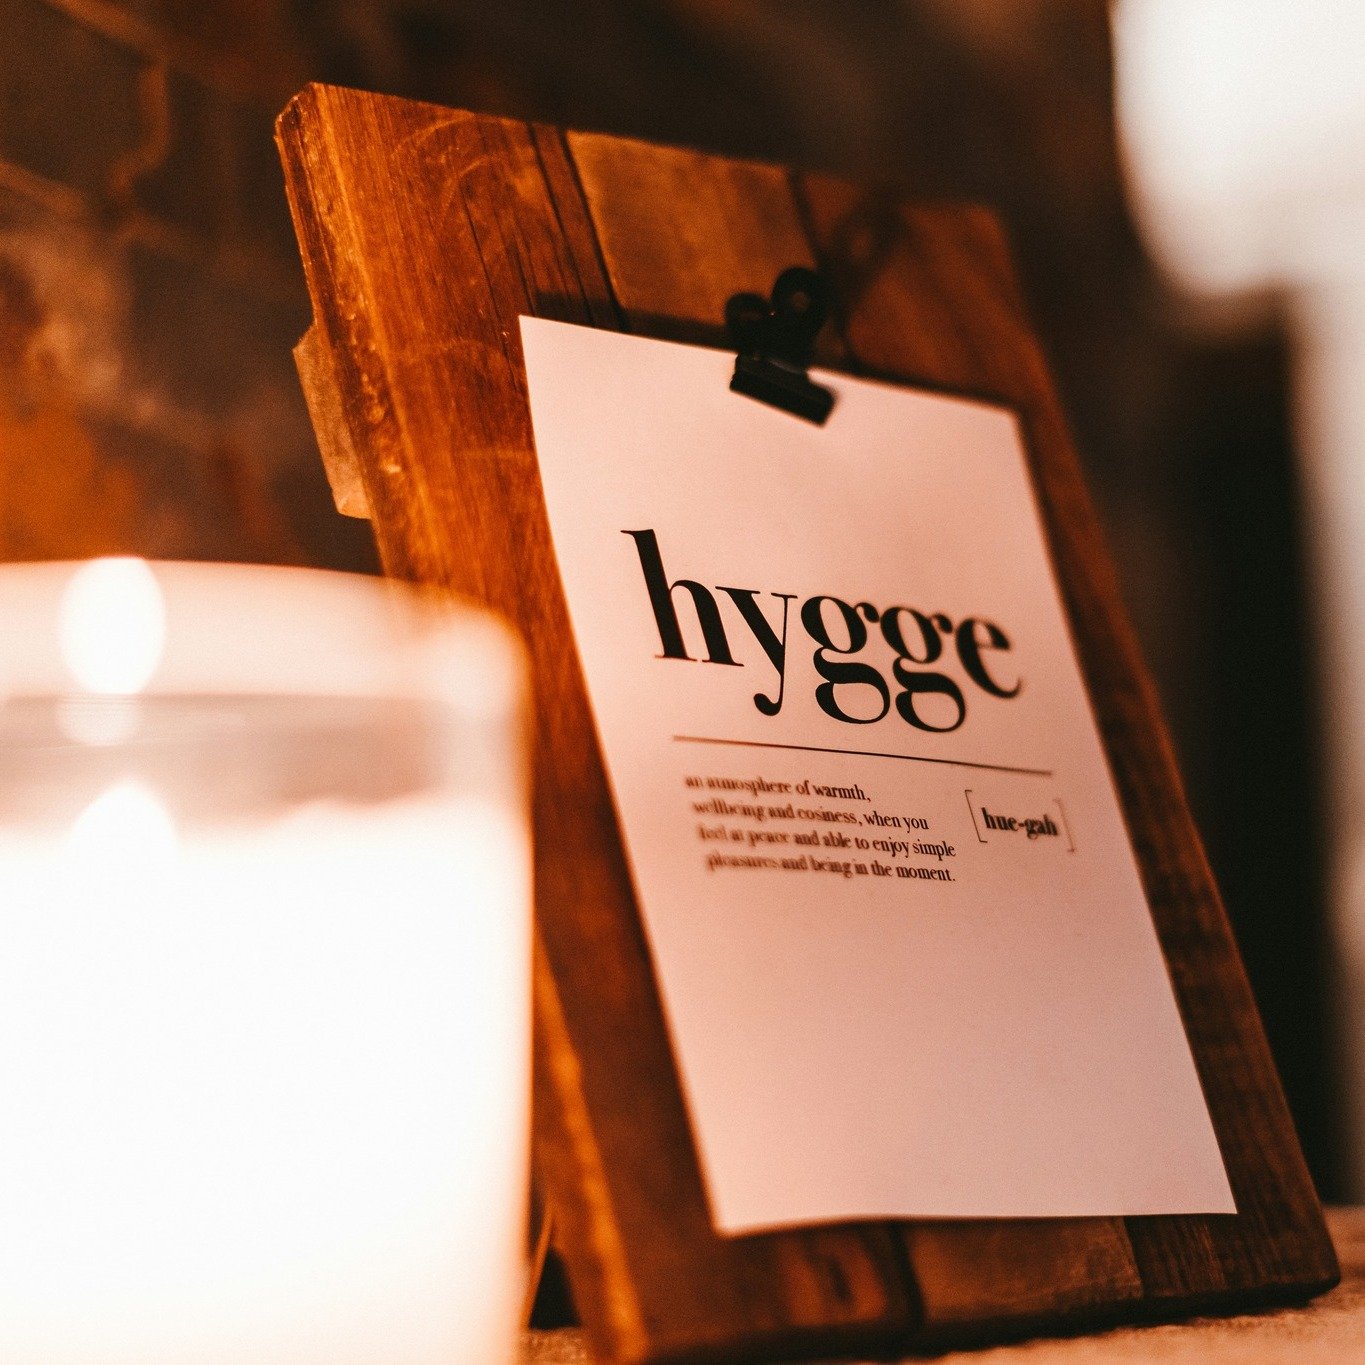 The thing that I love most about being in Denmark right now is getting to experience hygge firsthand.

The closest English translation for hygge is &lsquo;cozy&rsquo;, but it&rsquo;s really more than that.

It&rsquo;s a special atmosphere that they c